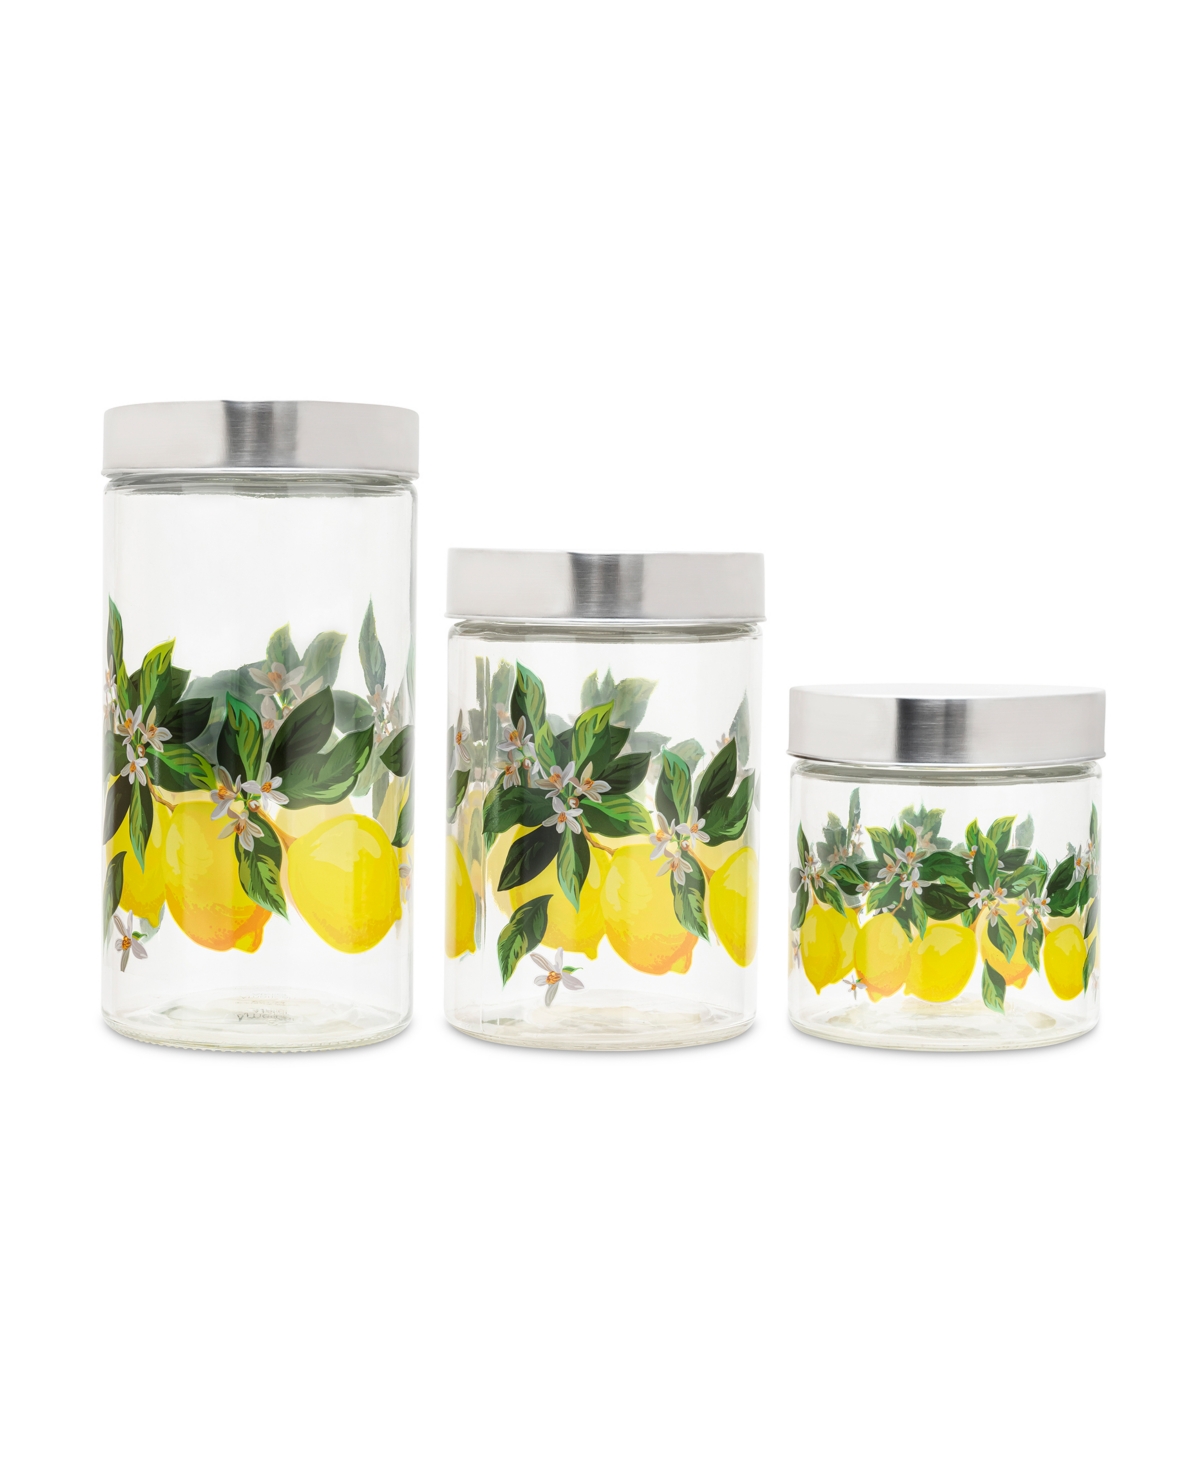 American Atelier Lemon Glass Canisters Set, 3 Piece In Clear